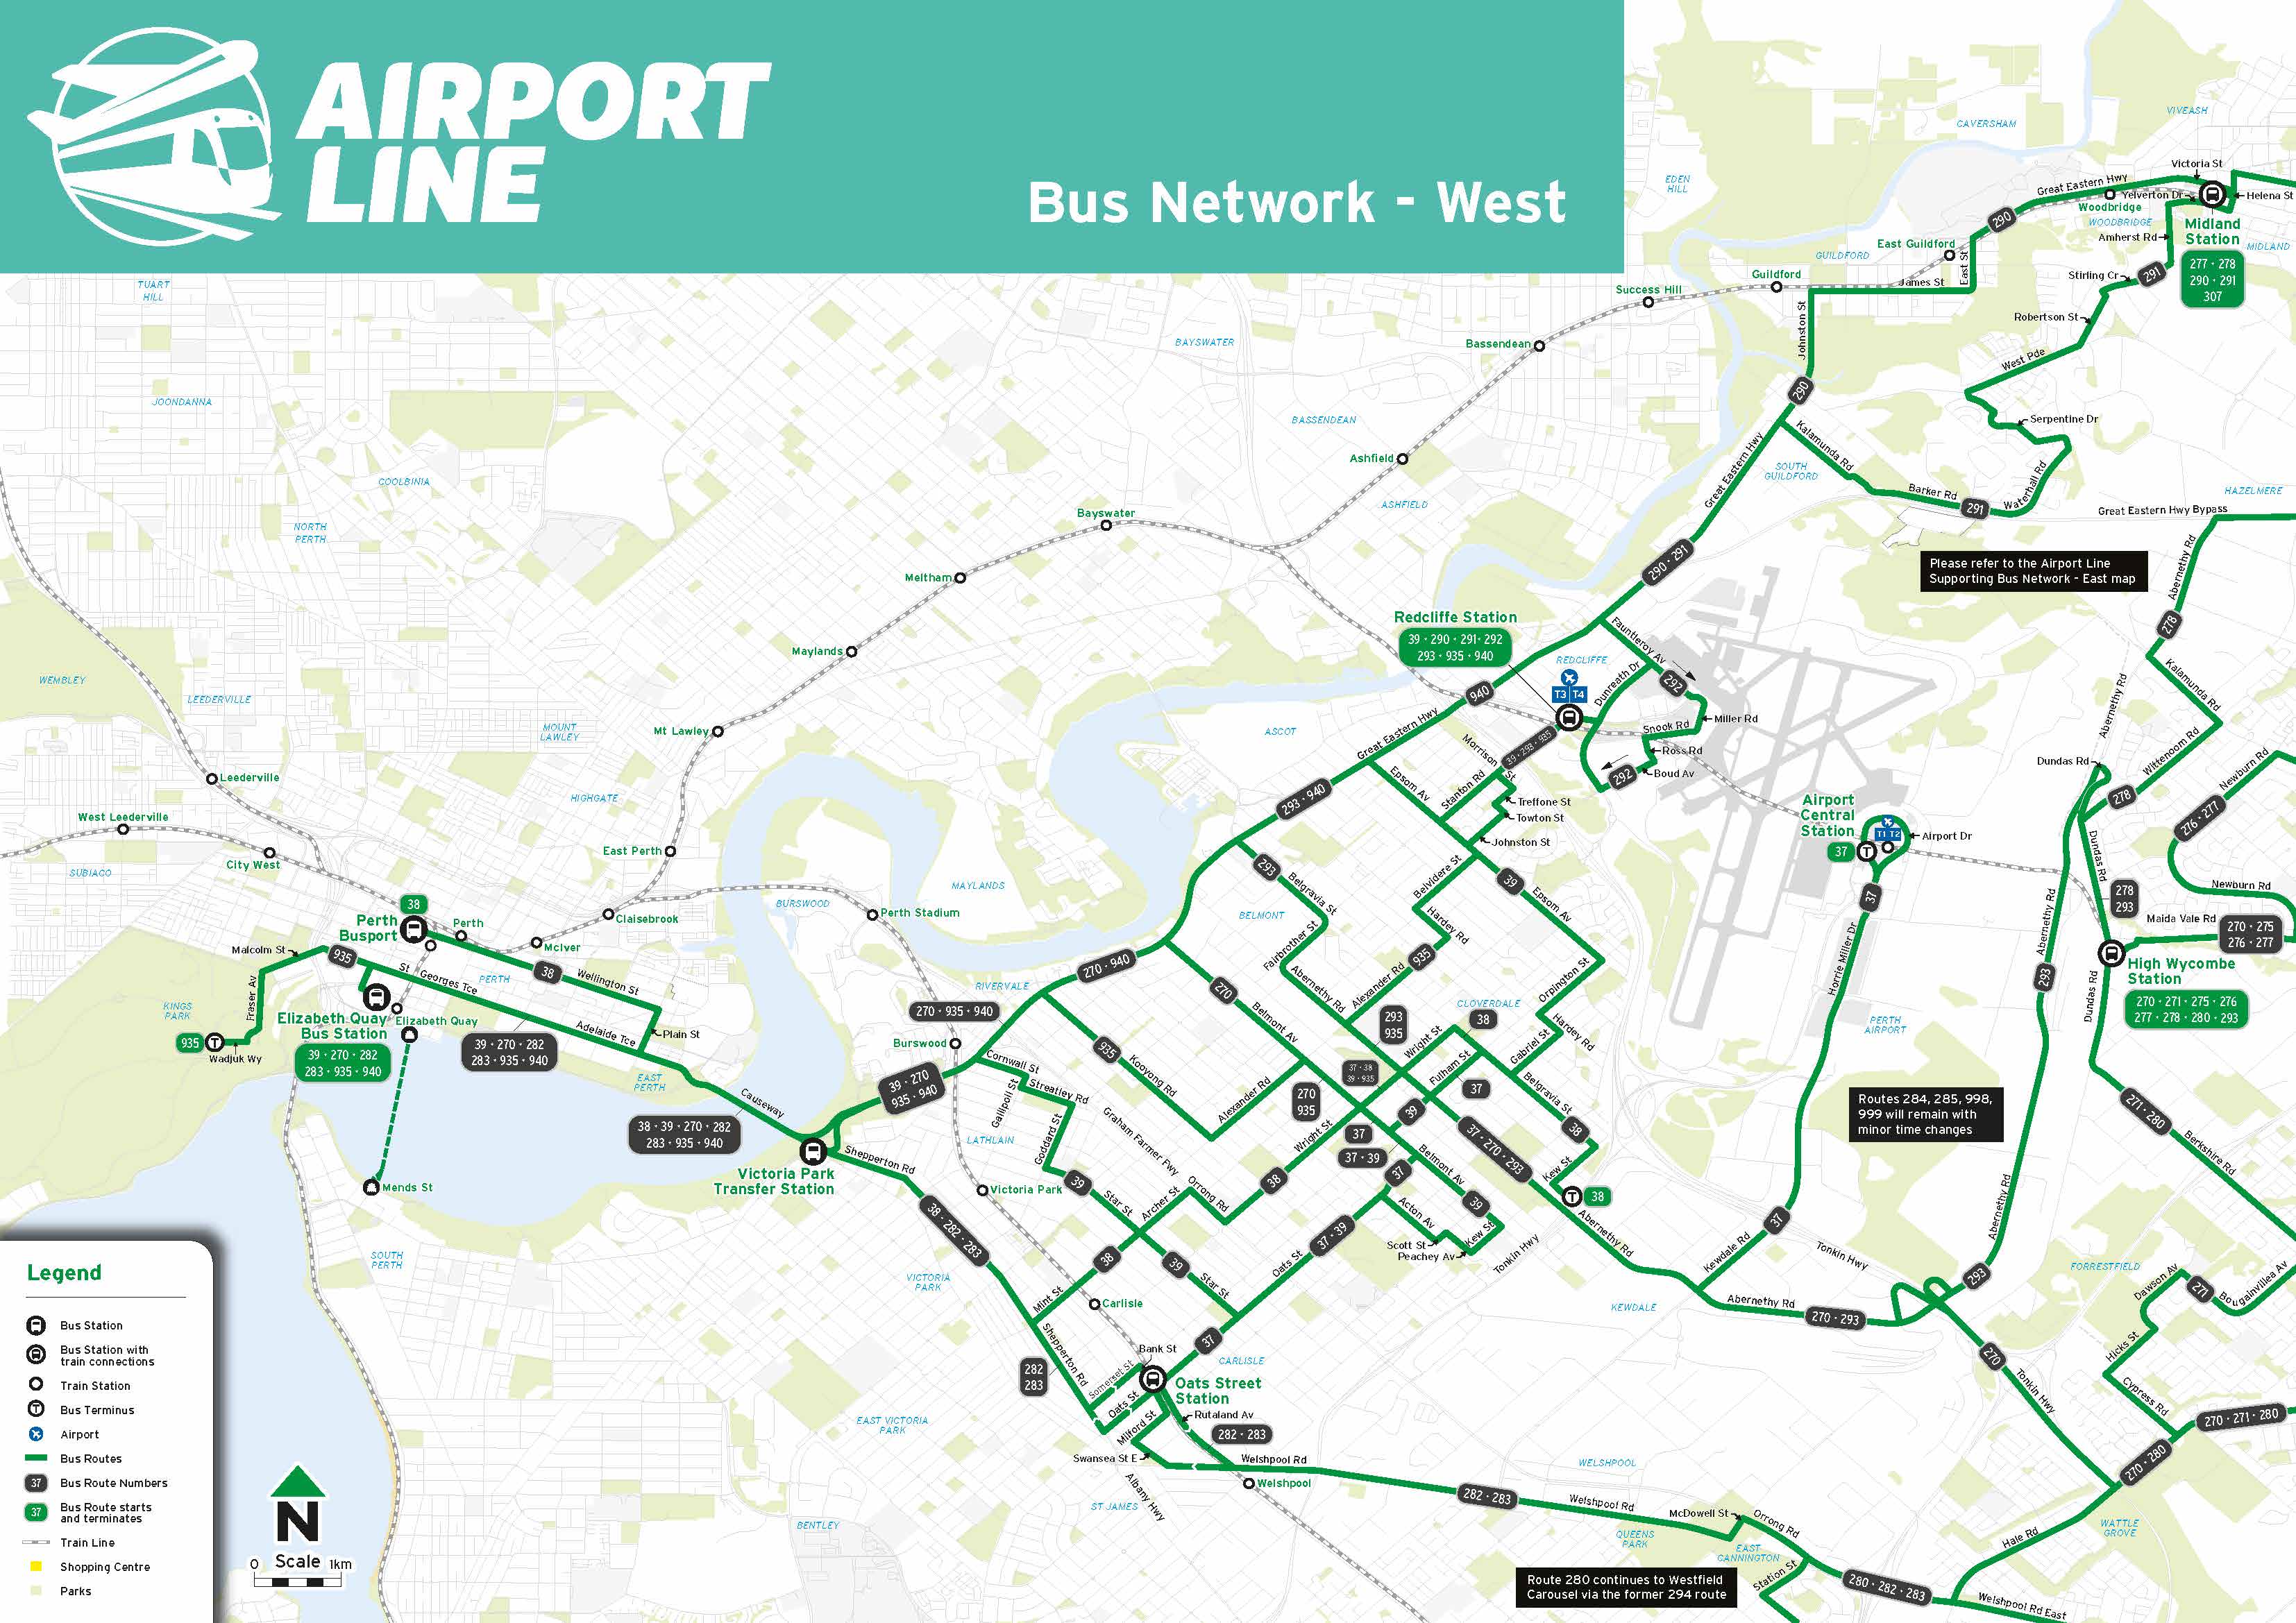 New bus network - West